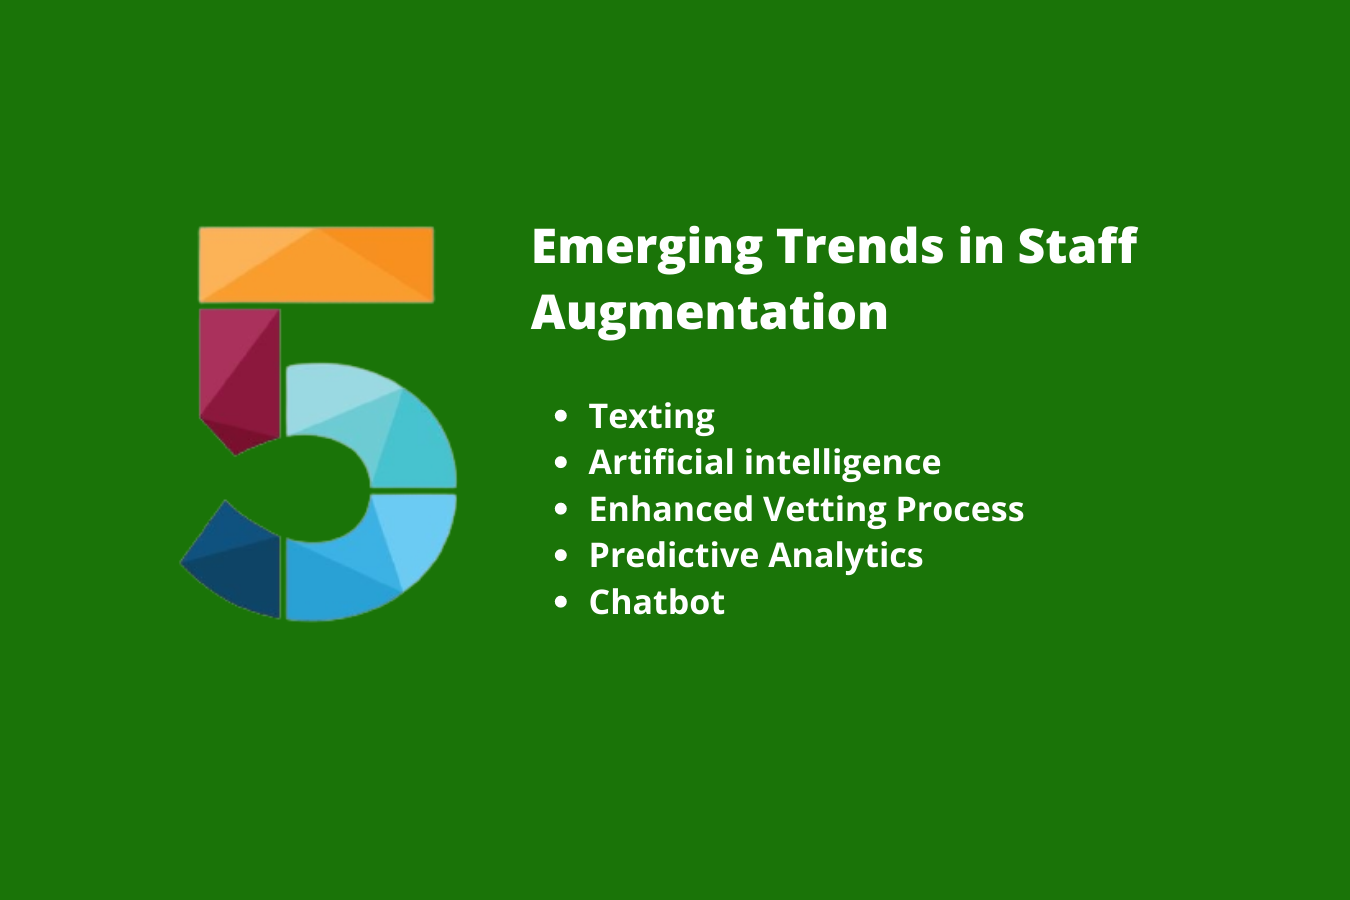 5 Emerging Trends in Staff Augmentation